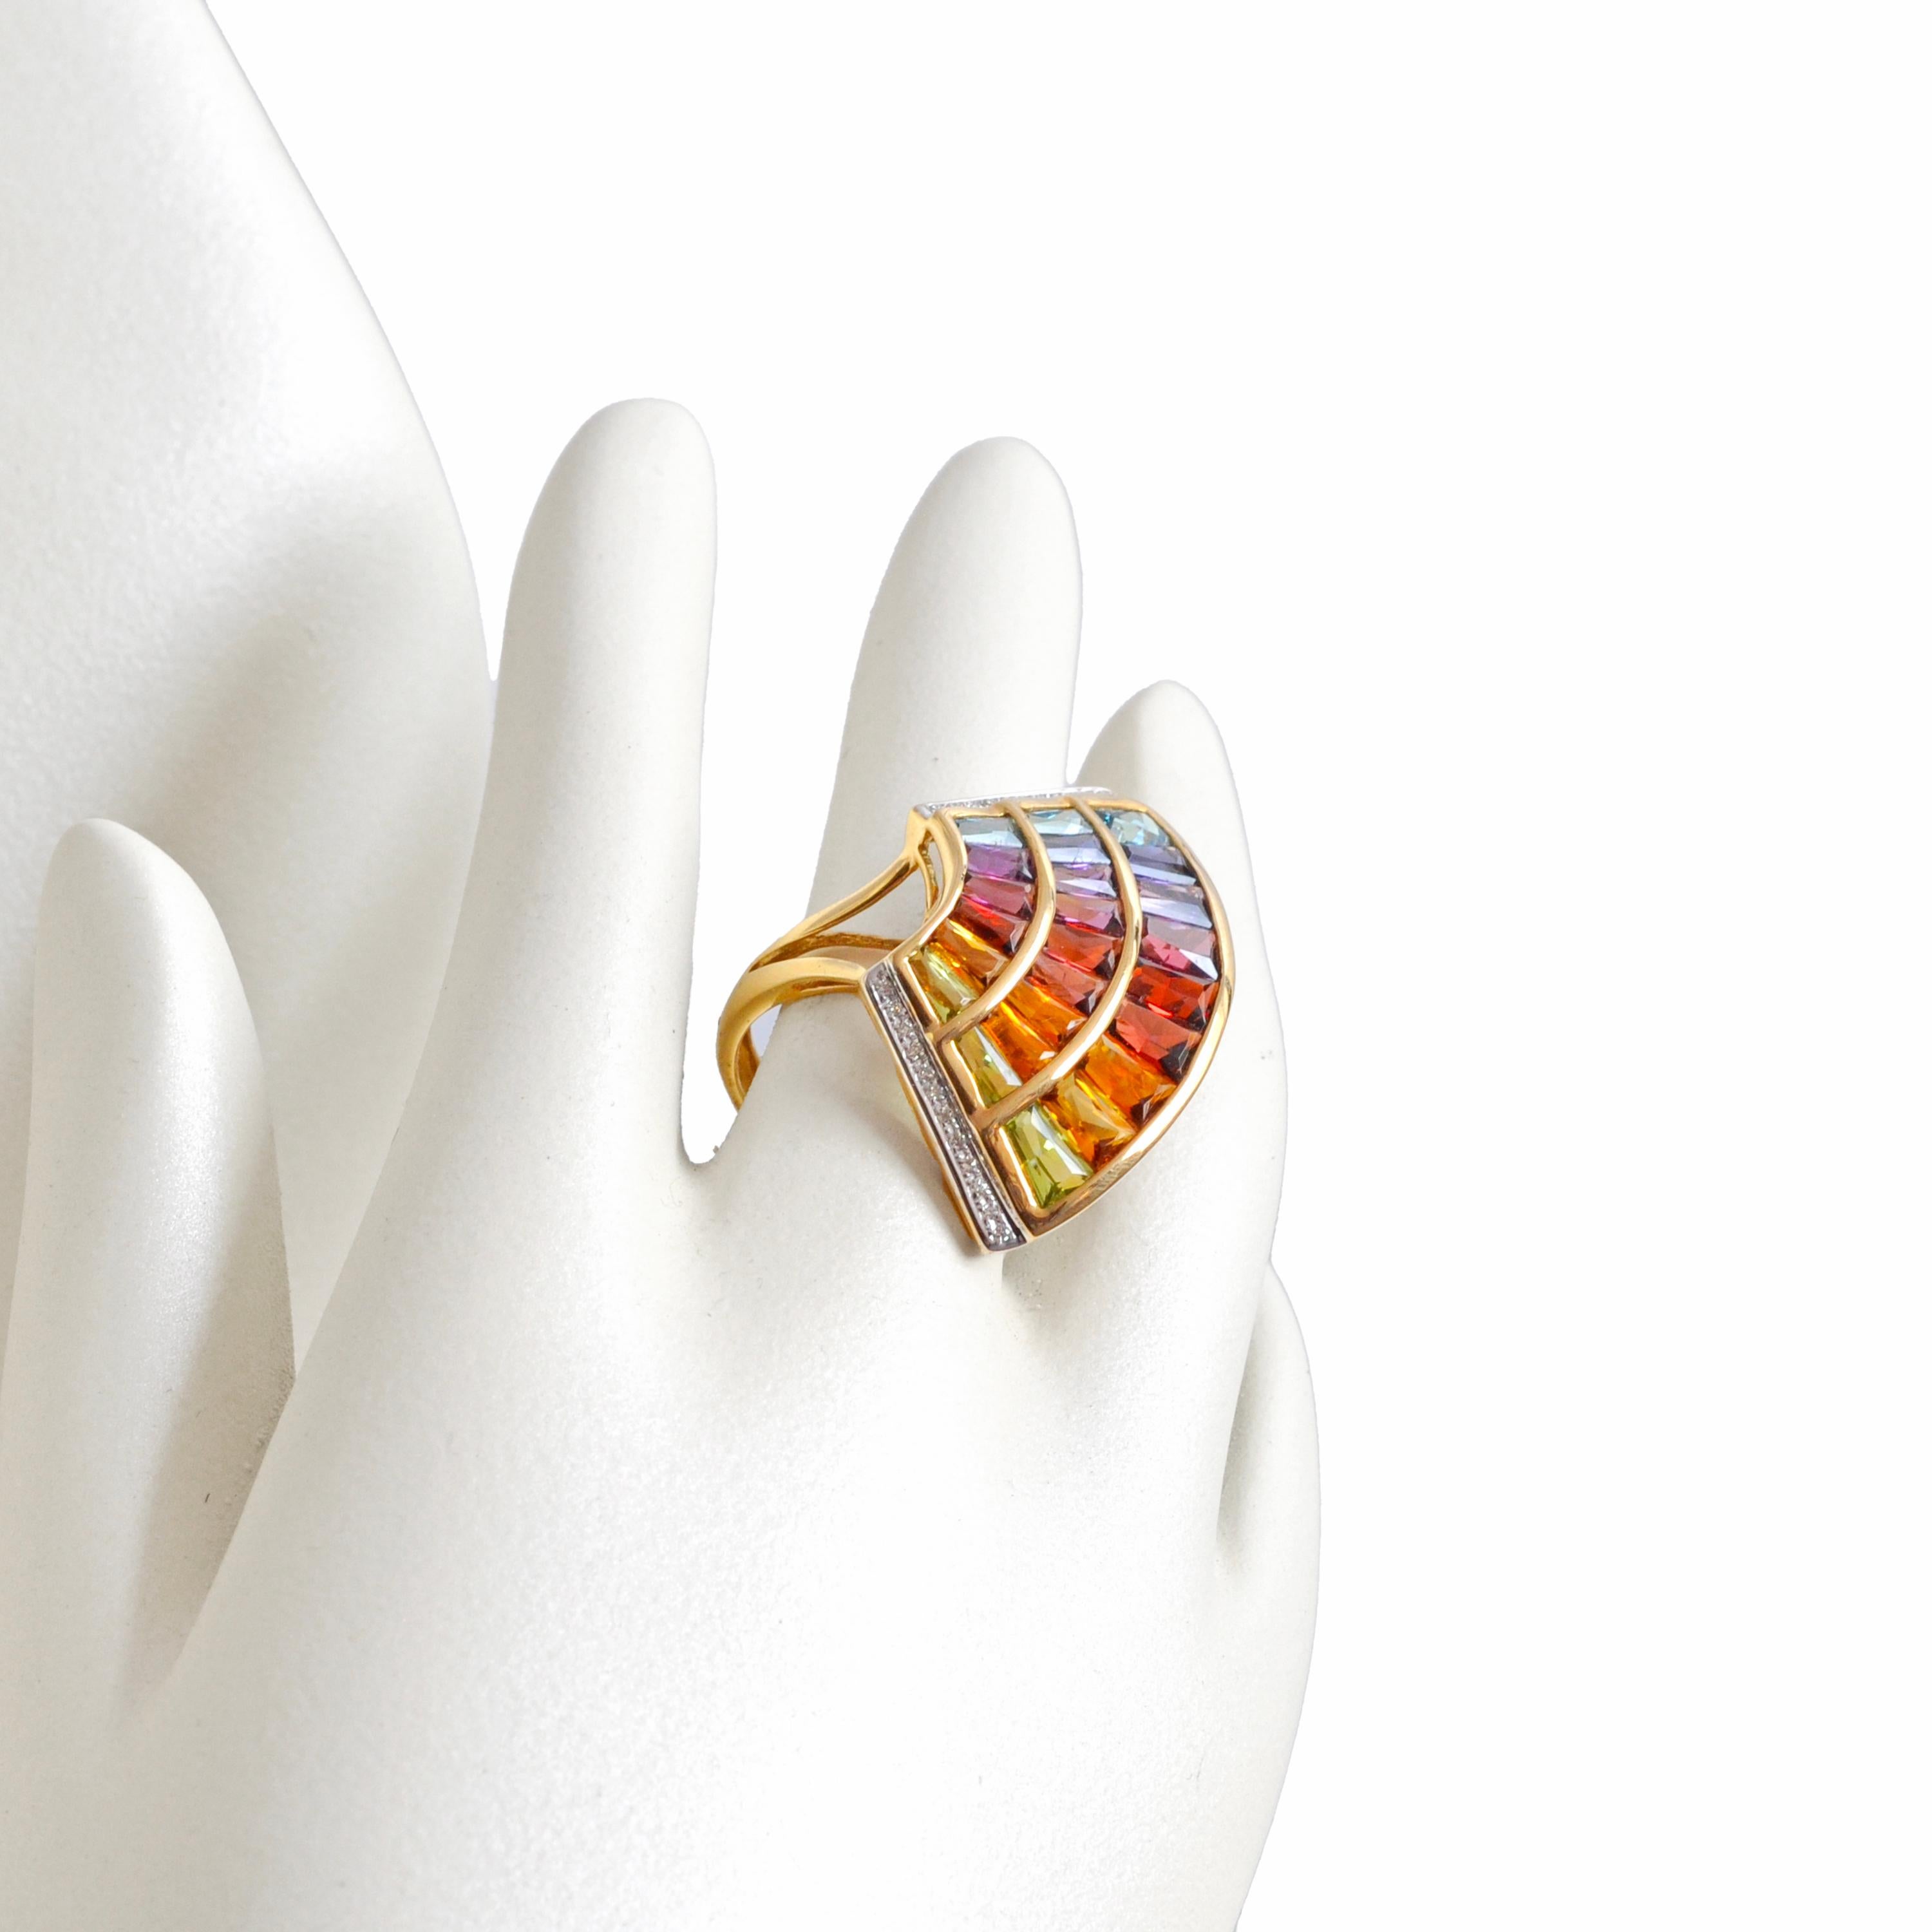 14 karat yellow gold multicolour rainbow contemporary wing cocktail ring

This multicolour rainbow natural gemstones single wing ring, a mesmerizing blend of grace and vibrancy. Crafted in elegant 14k gold, this ring feature a distinctive three-line